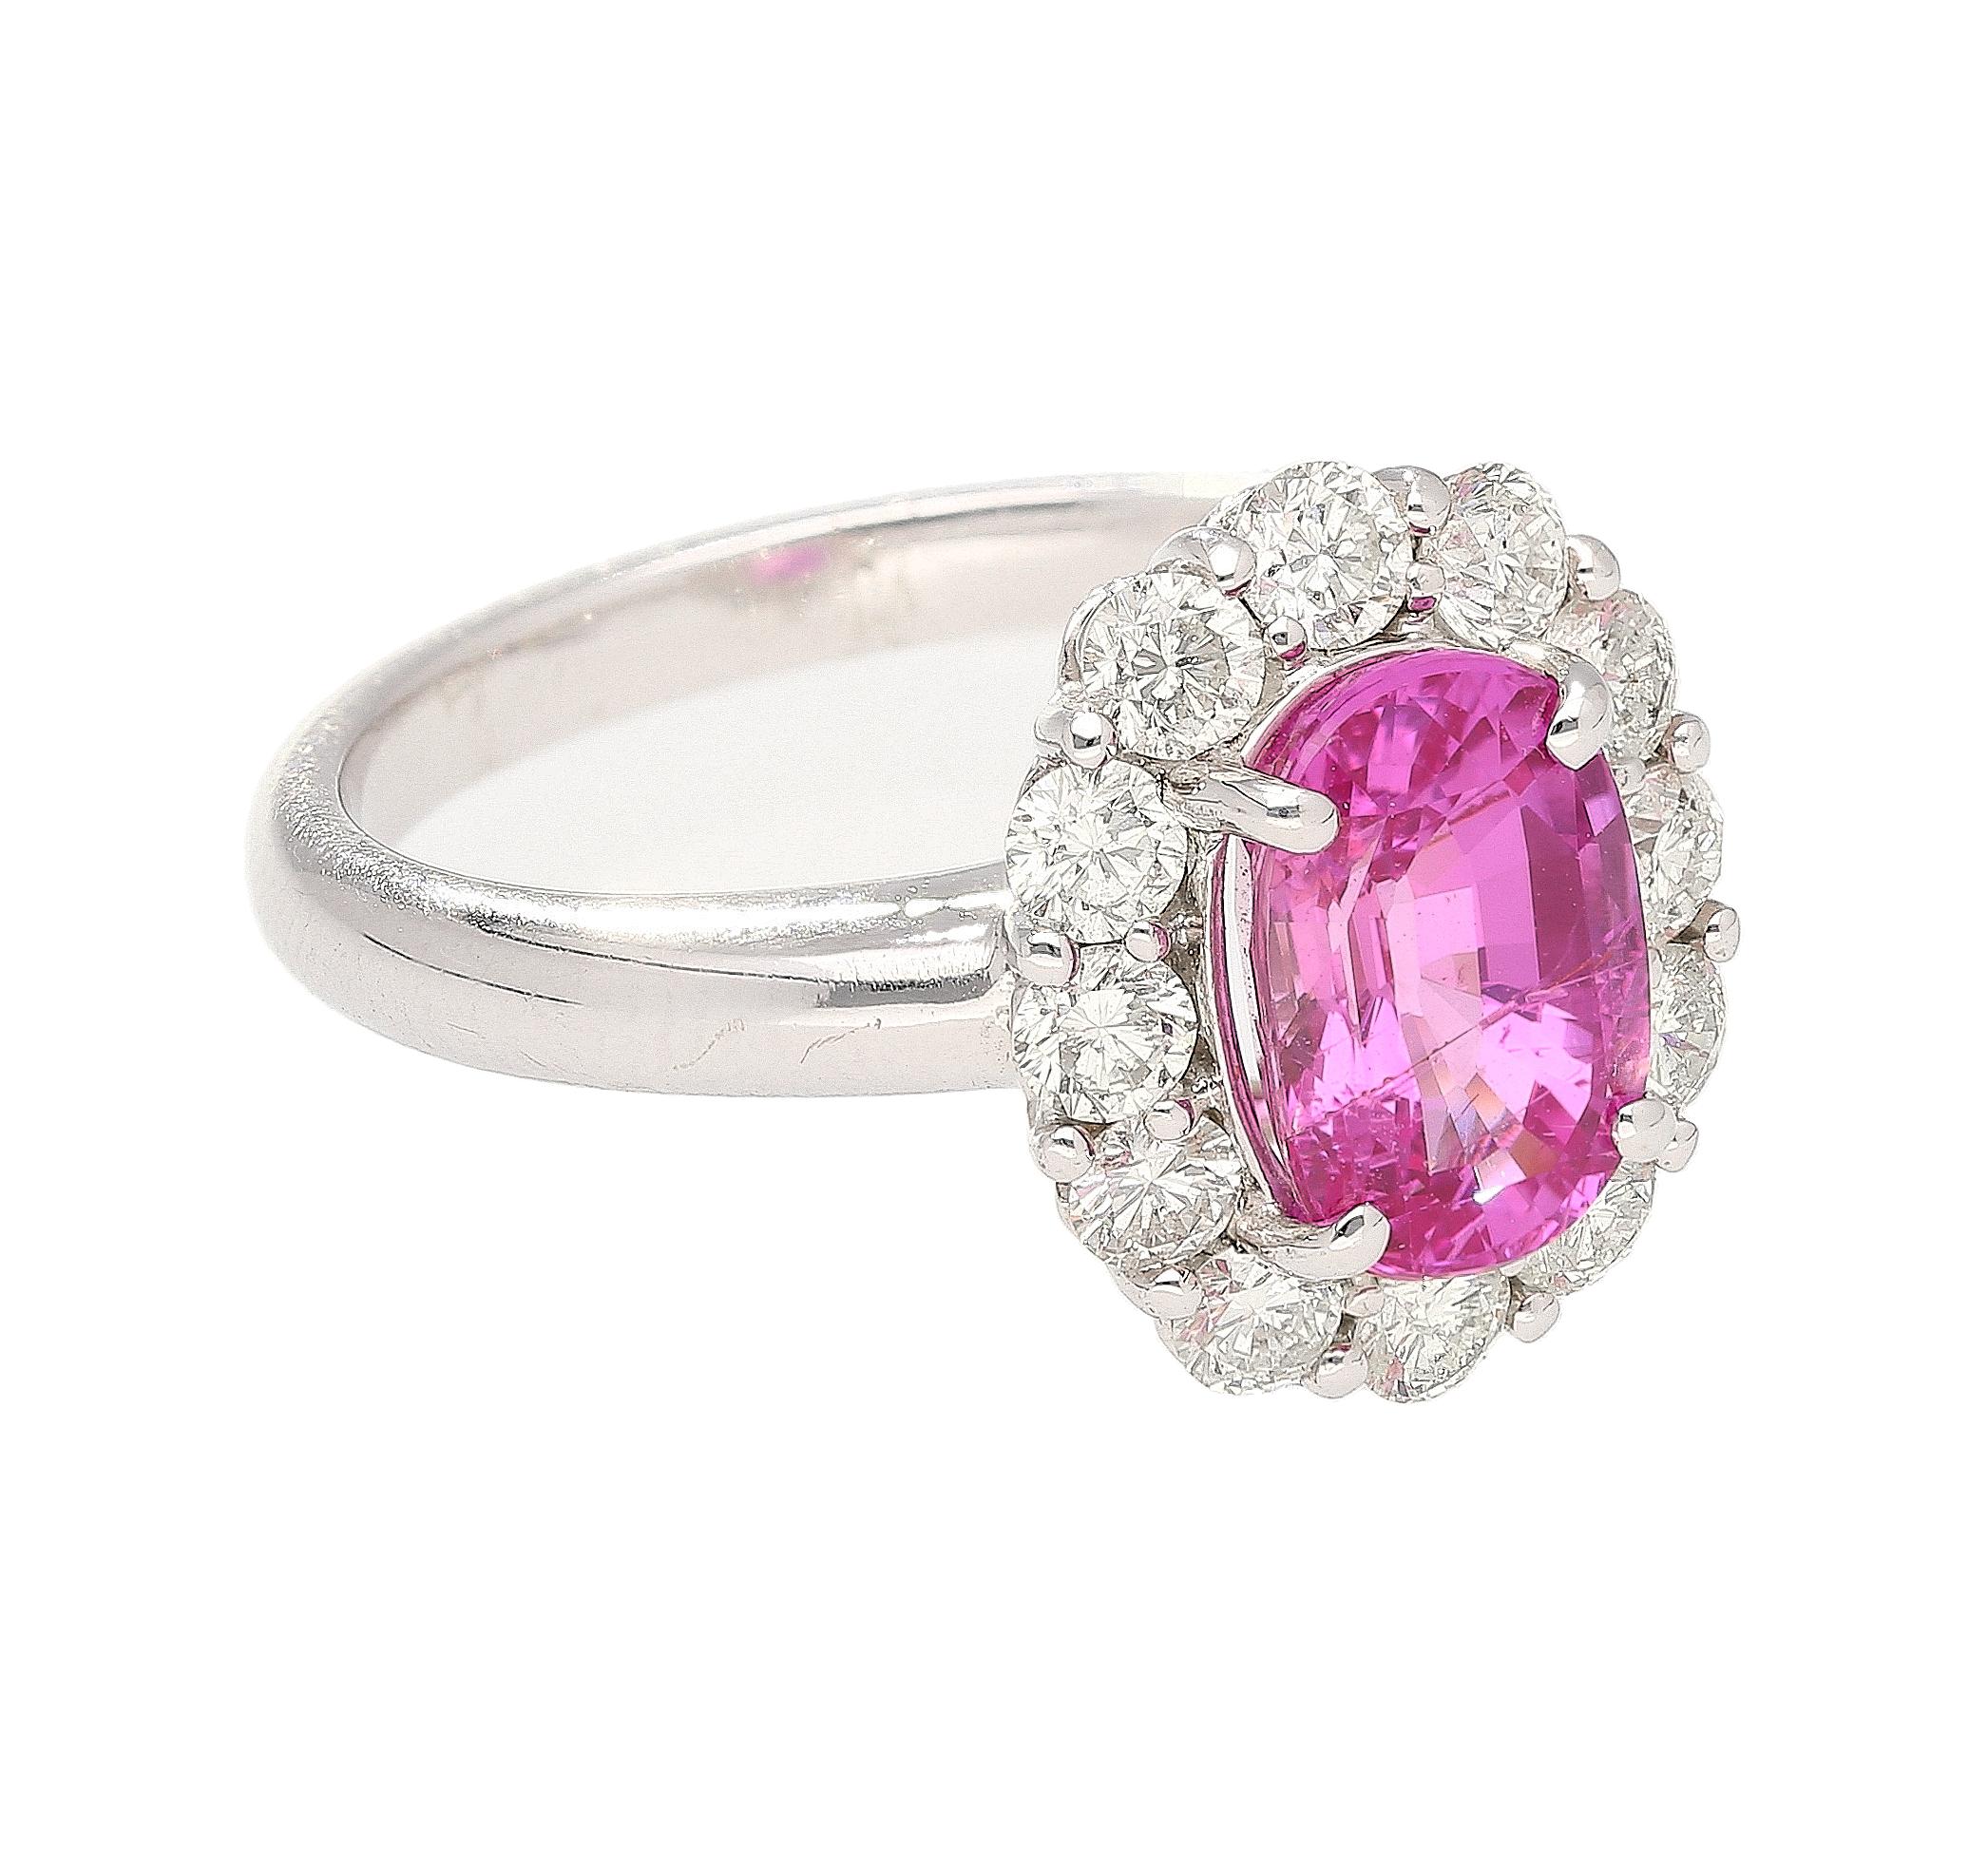 3.96 Carat Oval Cut Pink Sapphire and Diamond Halo Ring in 18k White Gold In New Condition For Sale In Miami, FL